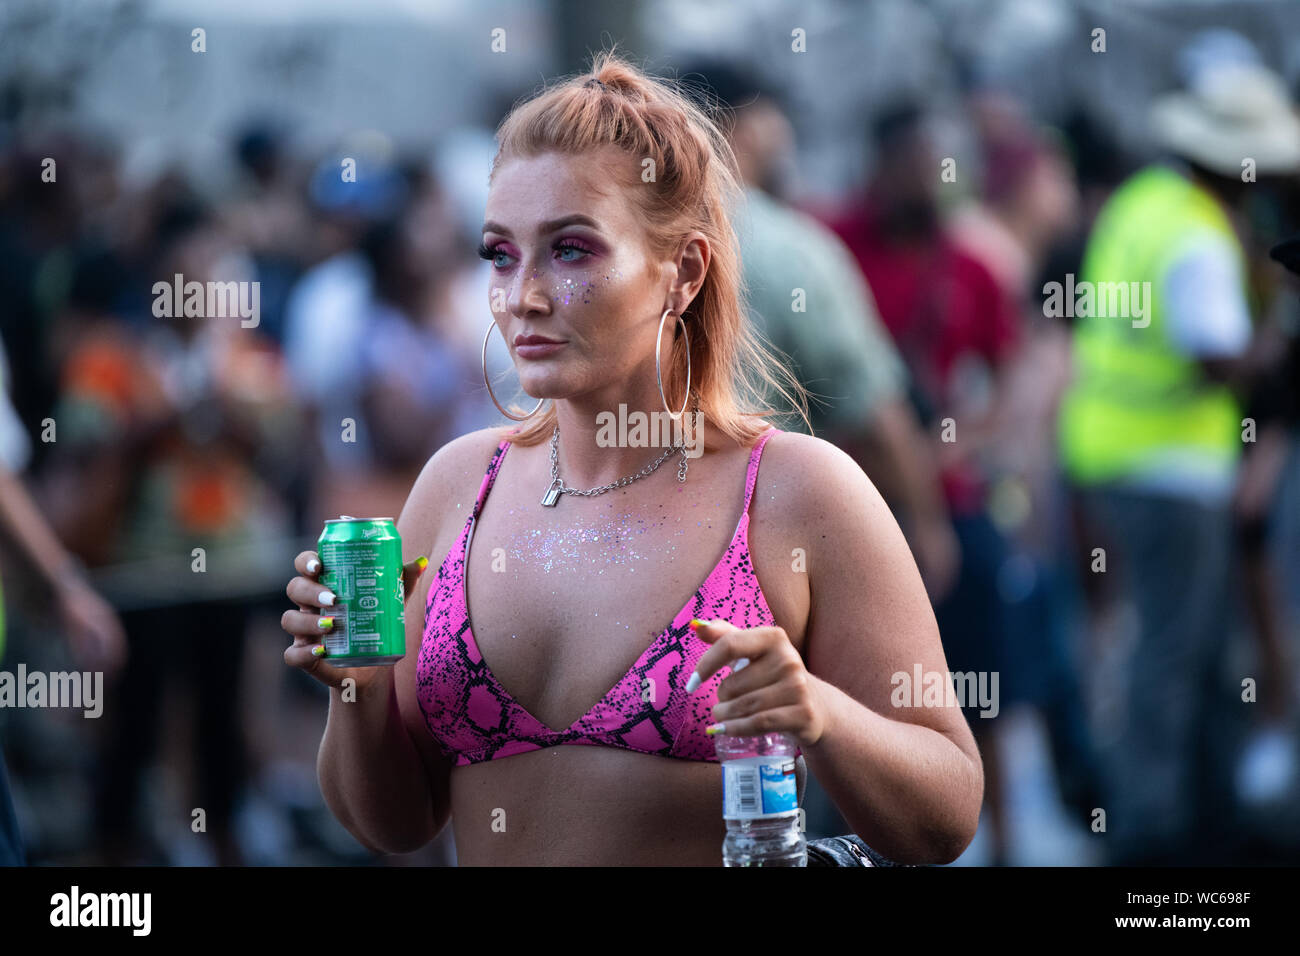 a white woman wearing a hot pink bra holding a can of sprite at